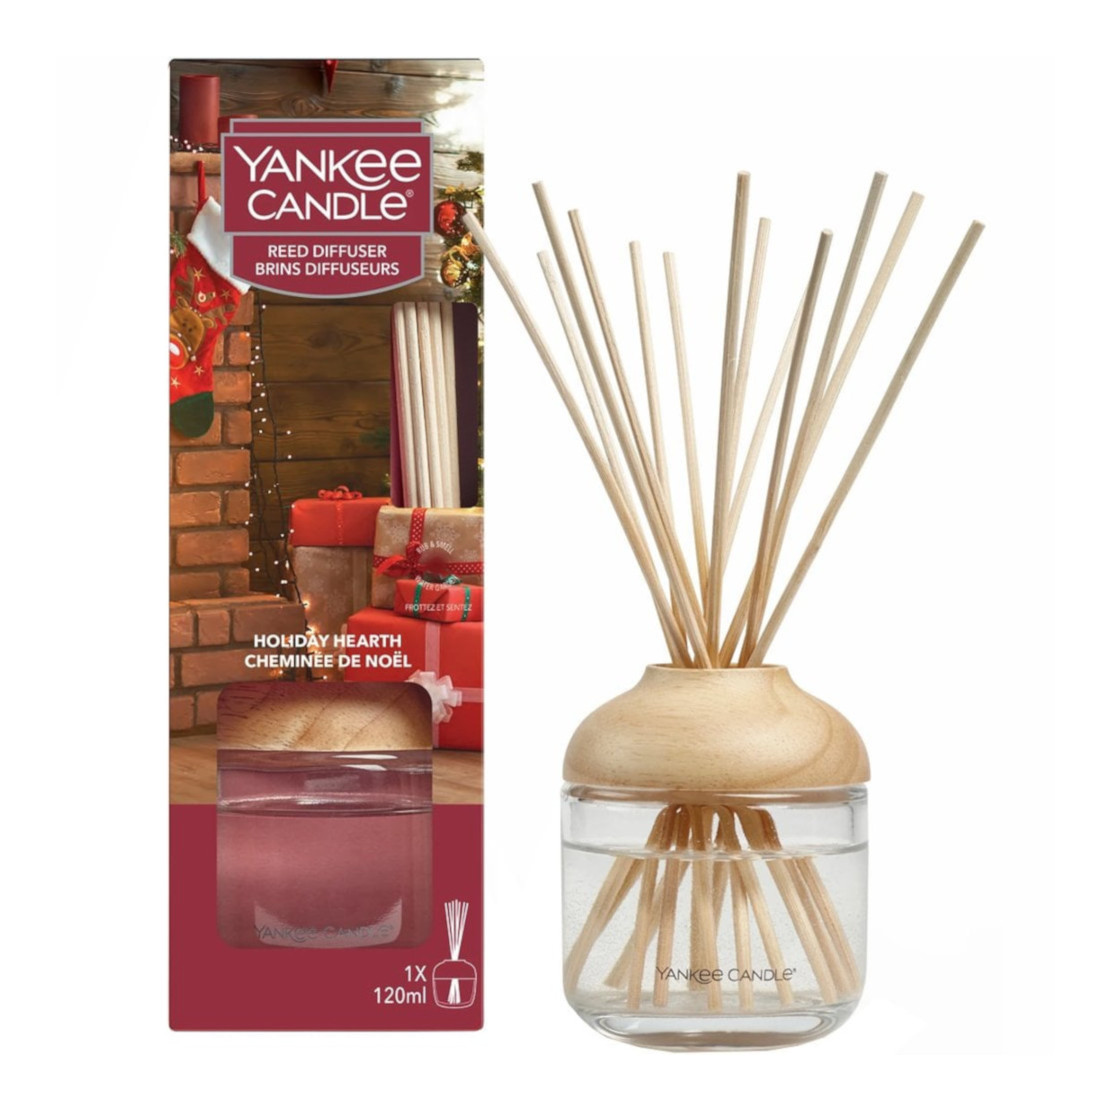 Yankee Candle Holiday Hearth Diffuser